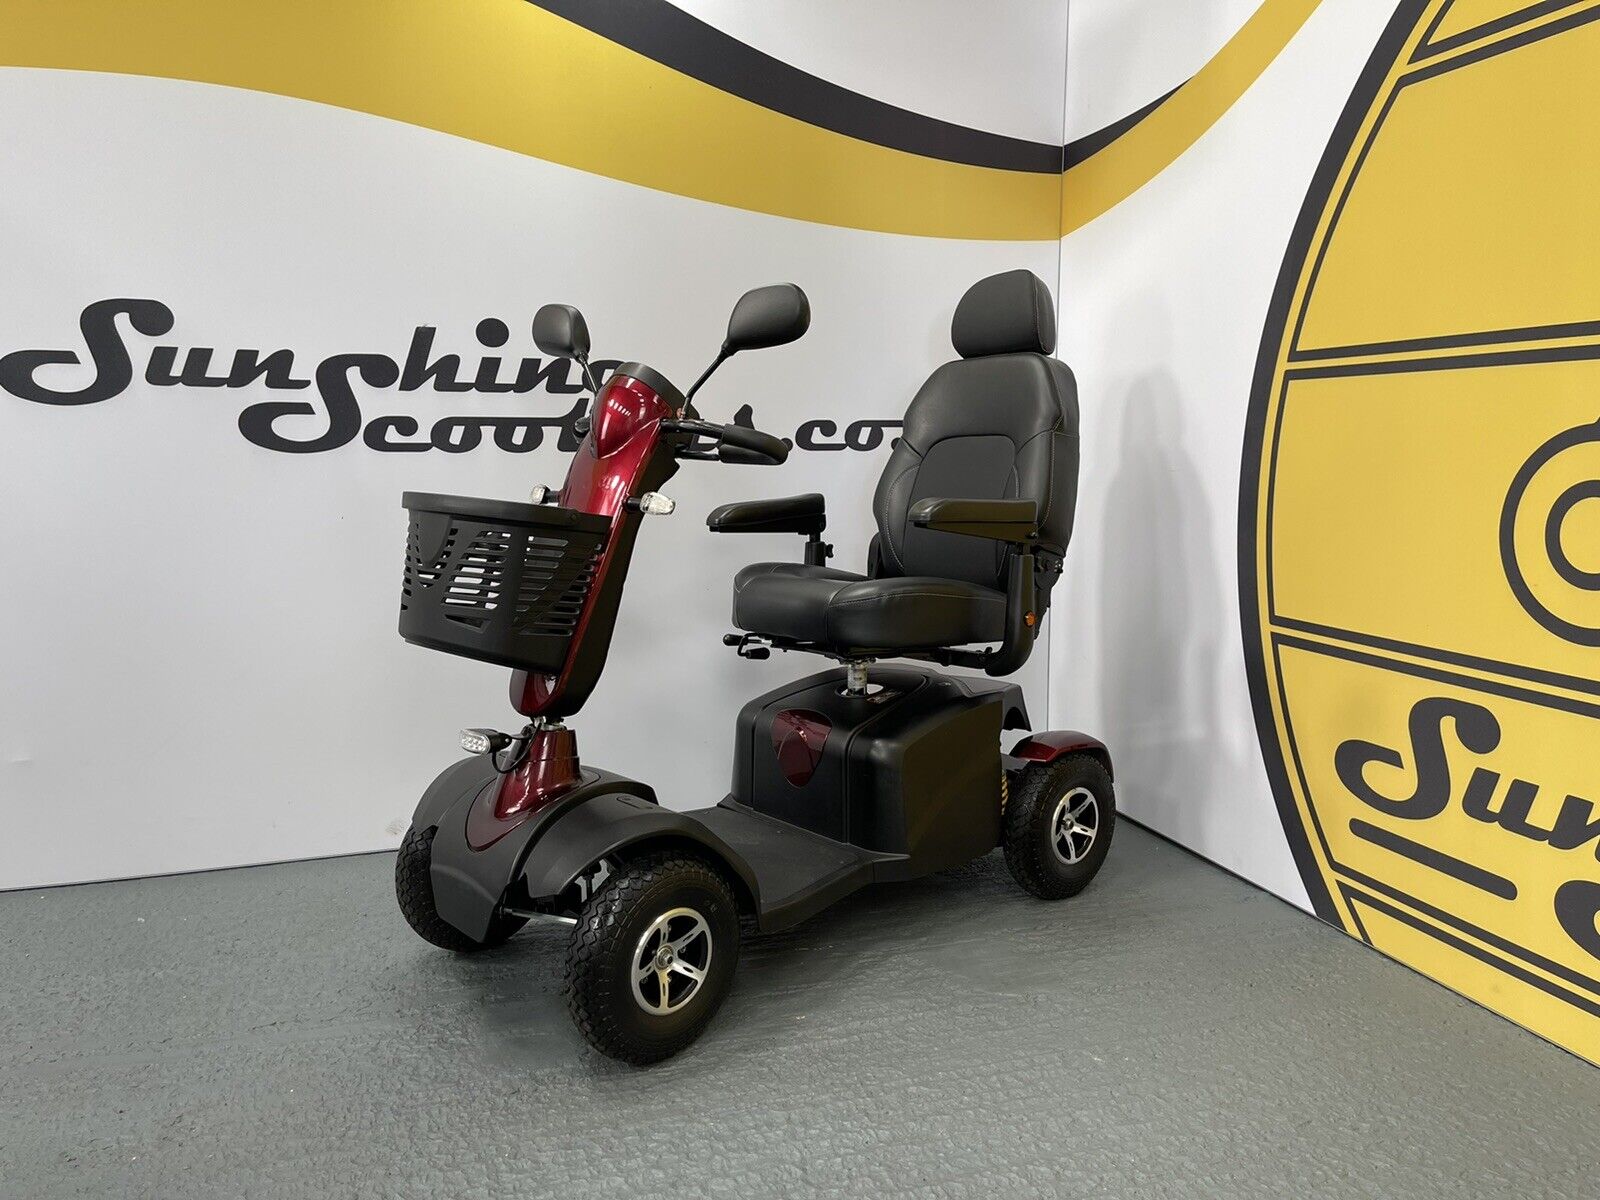 Excel Roadster DX8 Deluxe Mobility Scooter